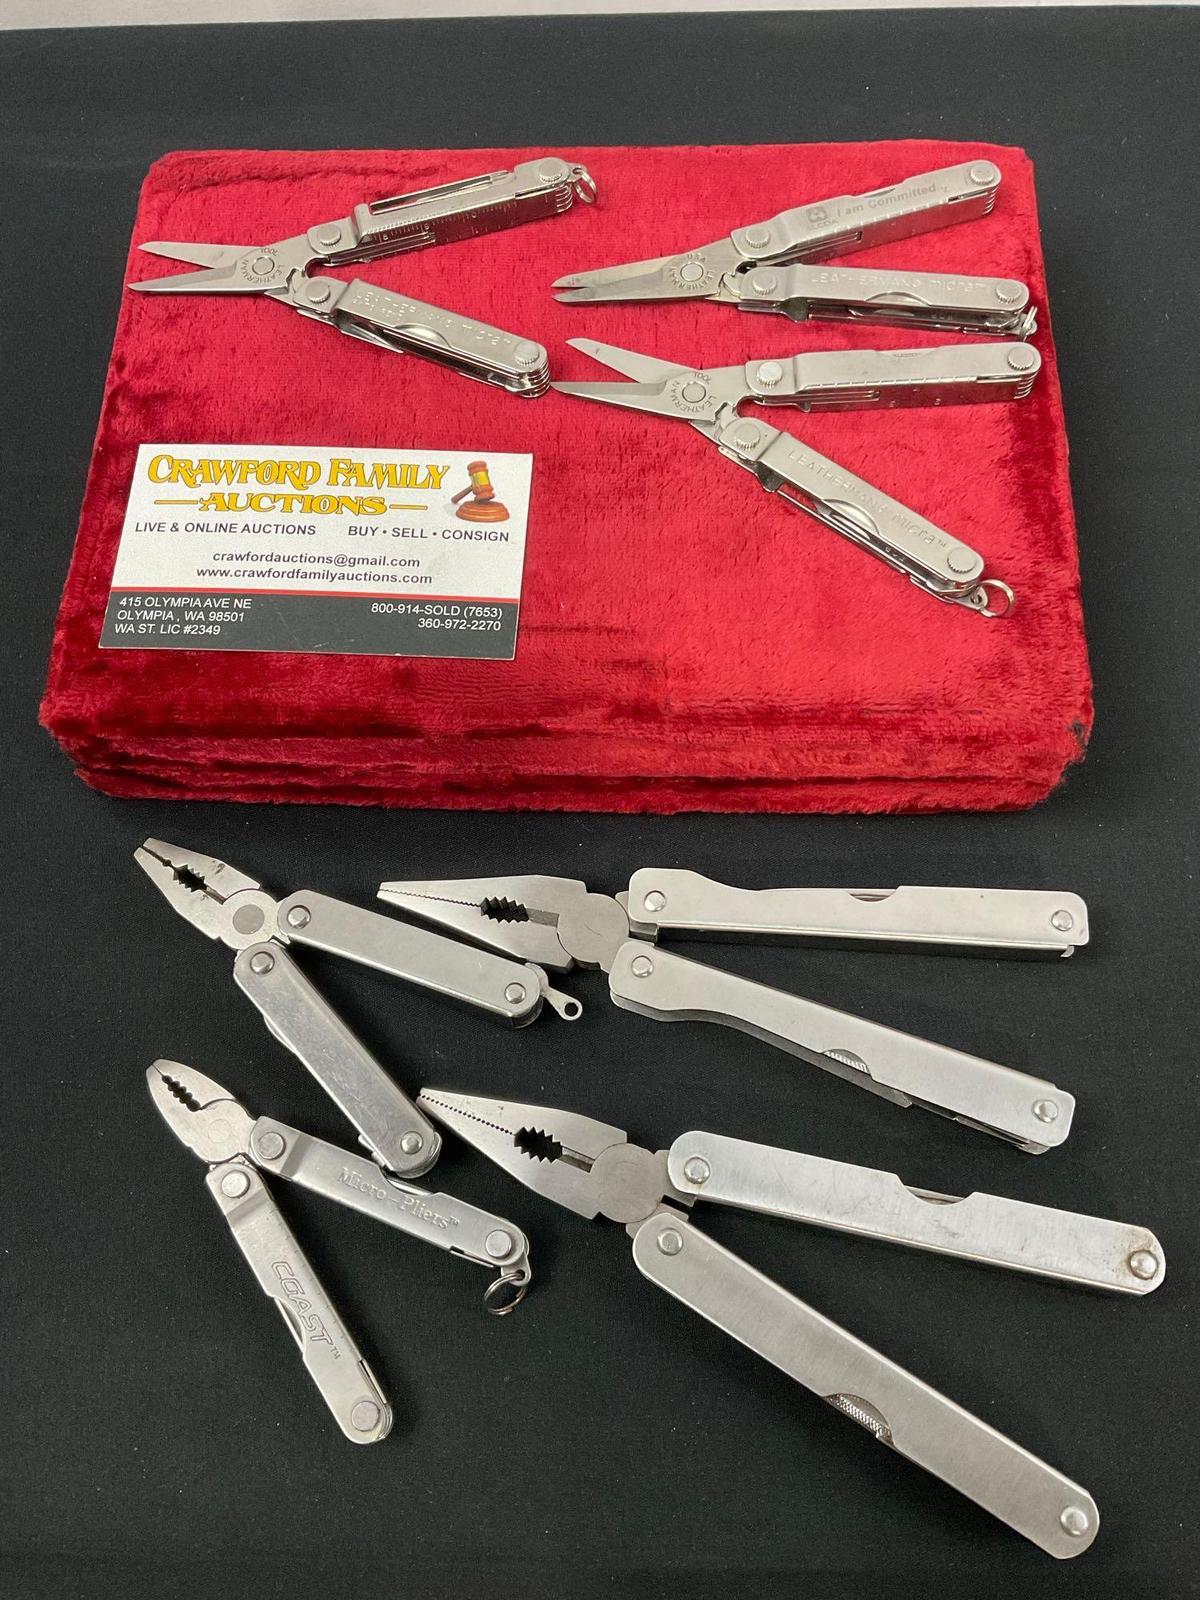 7x Stainless Steel Multi Tools, Incl 3x Leatherman Micras